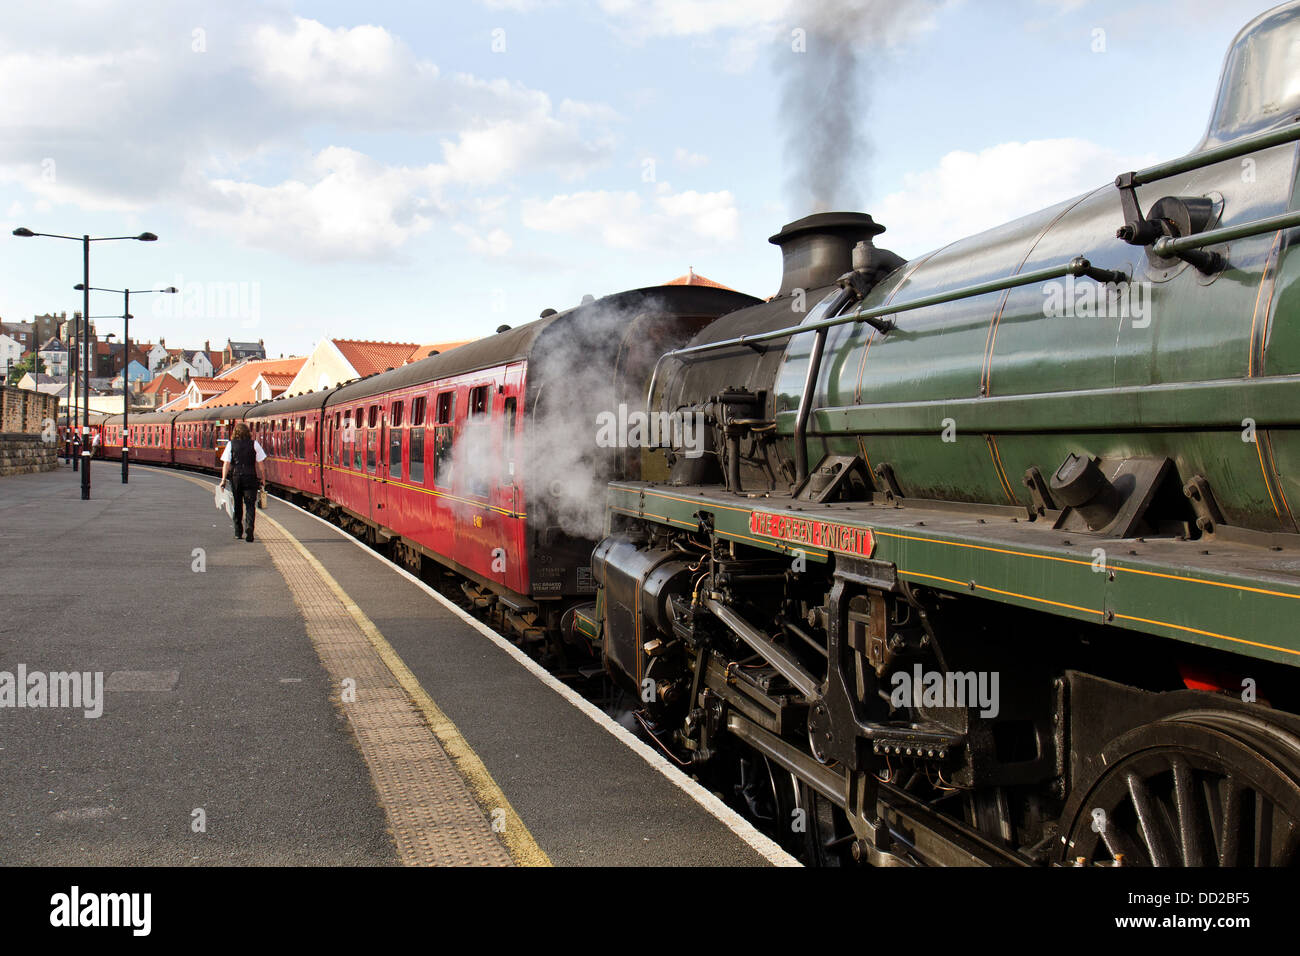 Steam locomotive pulling a passenger train on North Yorkshire moors Railway at Whitby, england Stock Photo